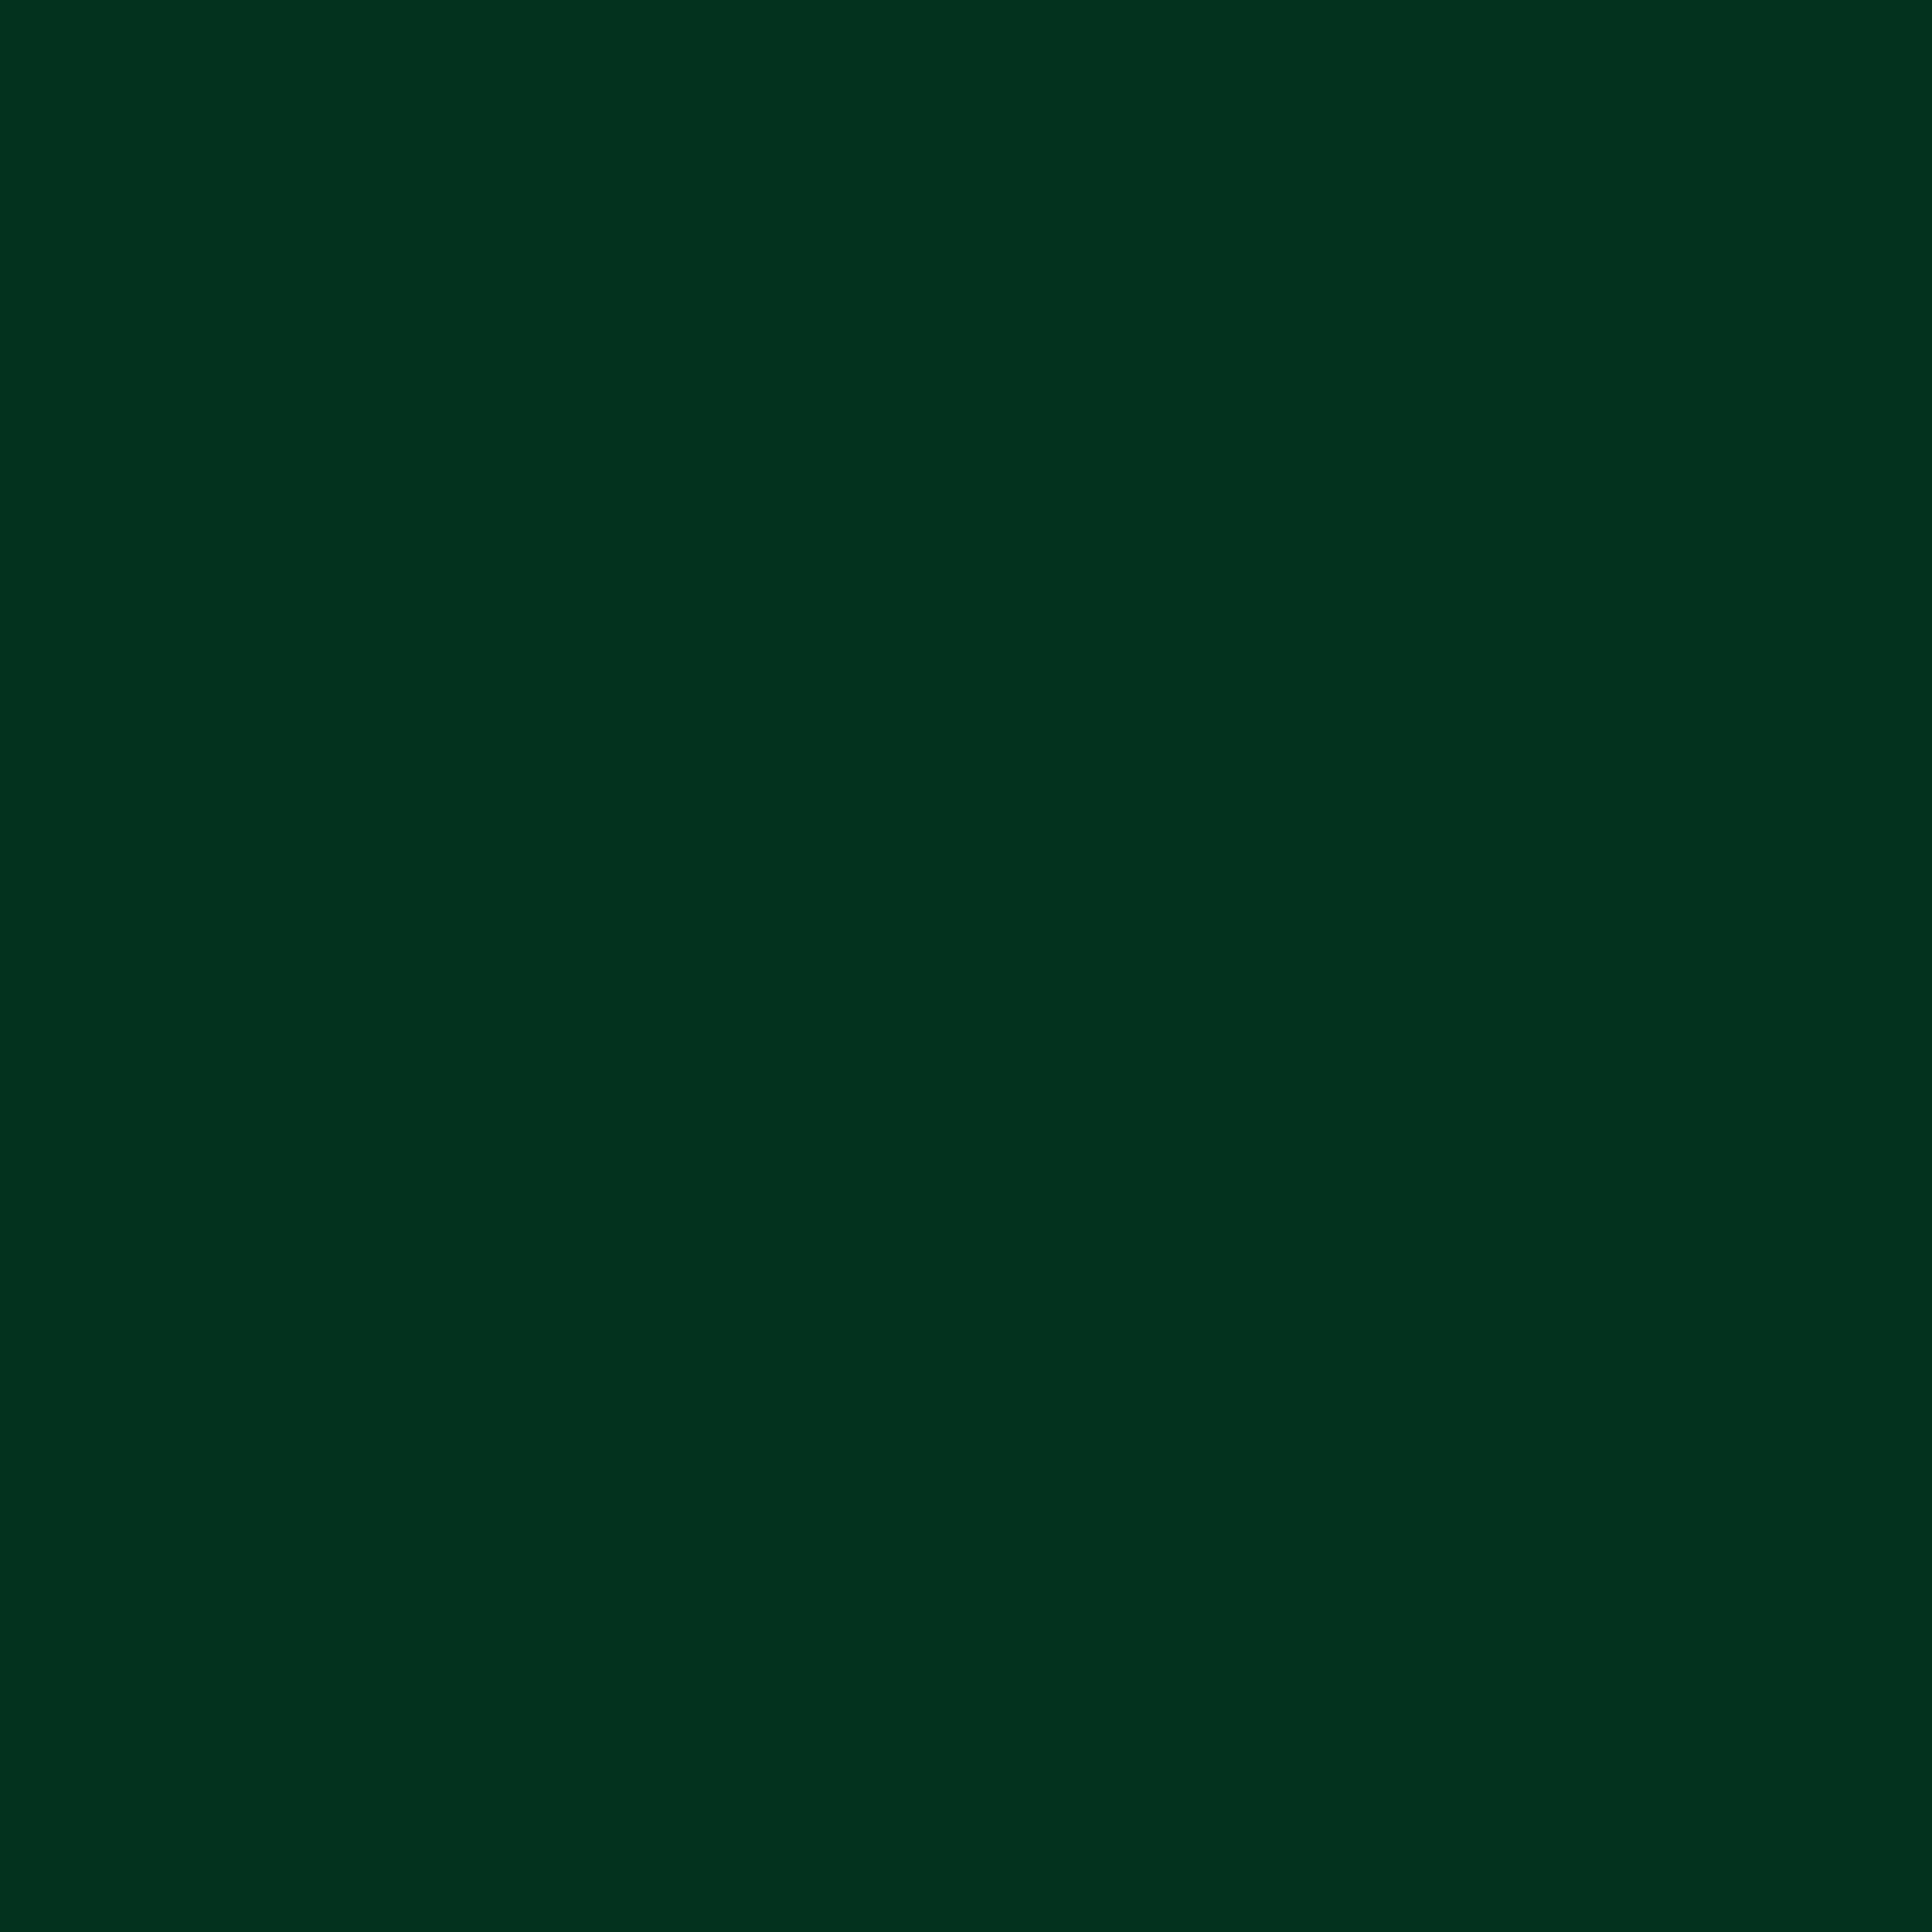 3600x3600 Dark Green Solid Color Background